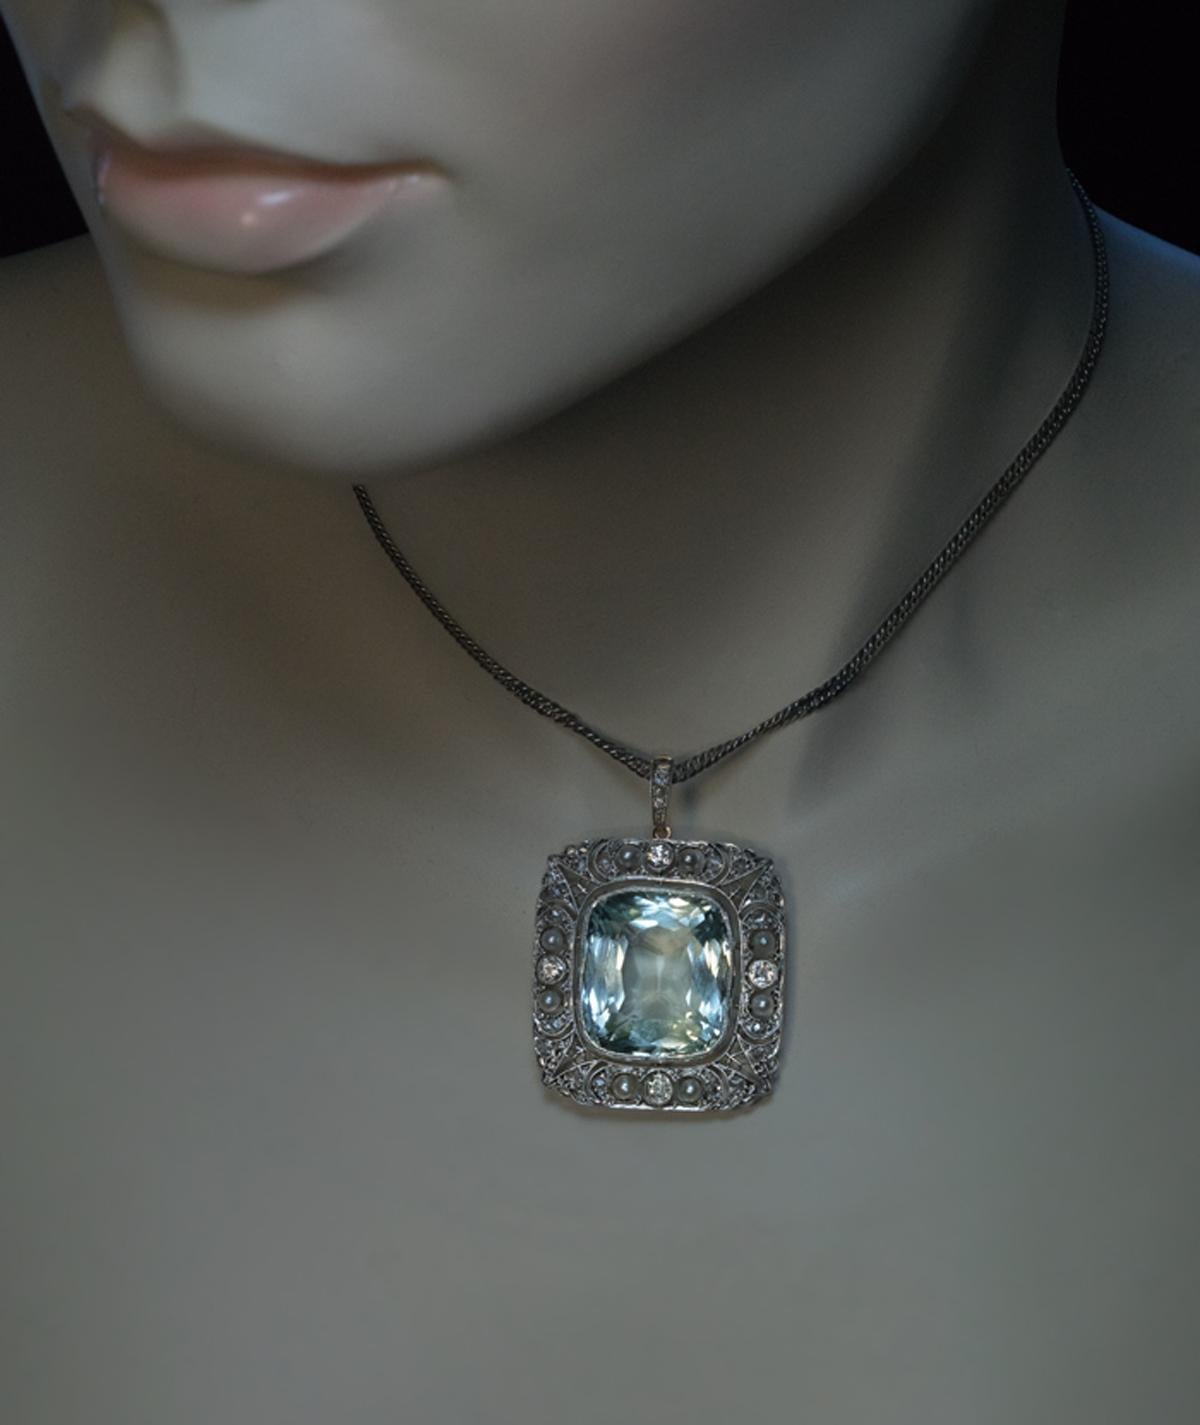 Circa 1905

This exquisite antique pendant from the Edwardian era features a huge cushion cut 34.25 ct aquamarine of excellent color, clarity, and polish. The aquamarine measures approximately 21.16 x 18.14 x 12.22 mm. The center stone is set in an